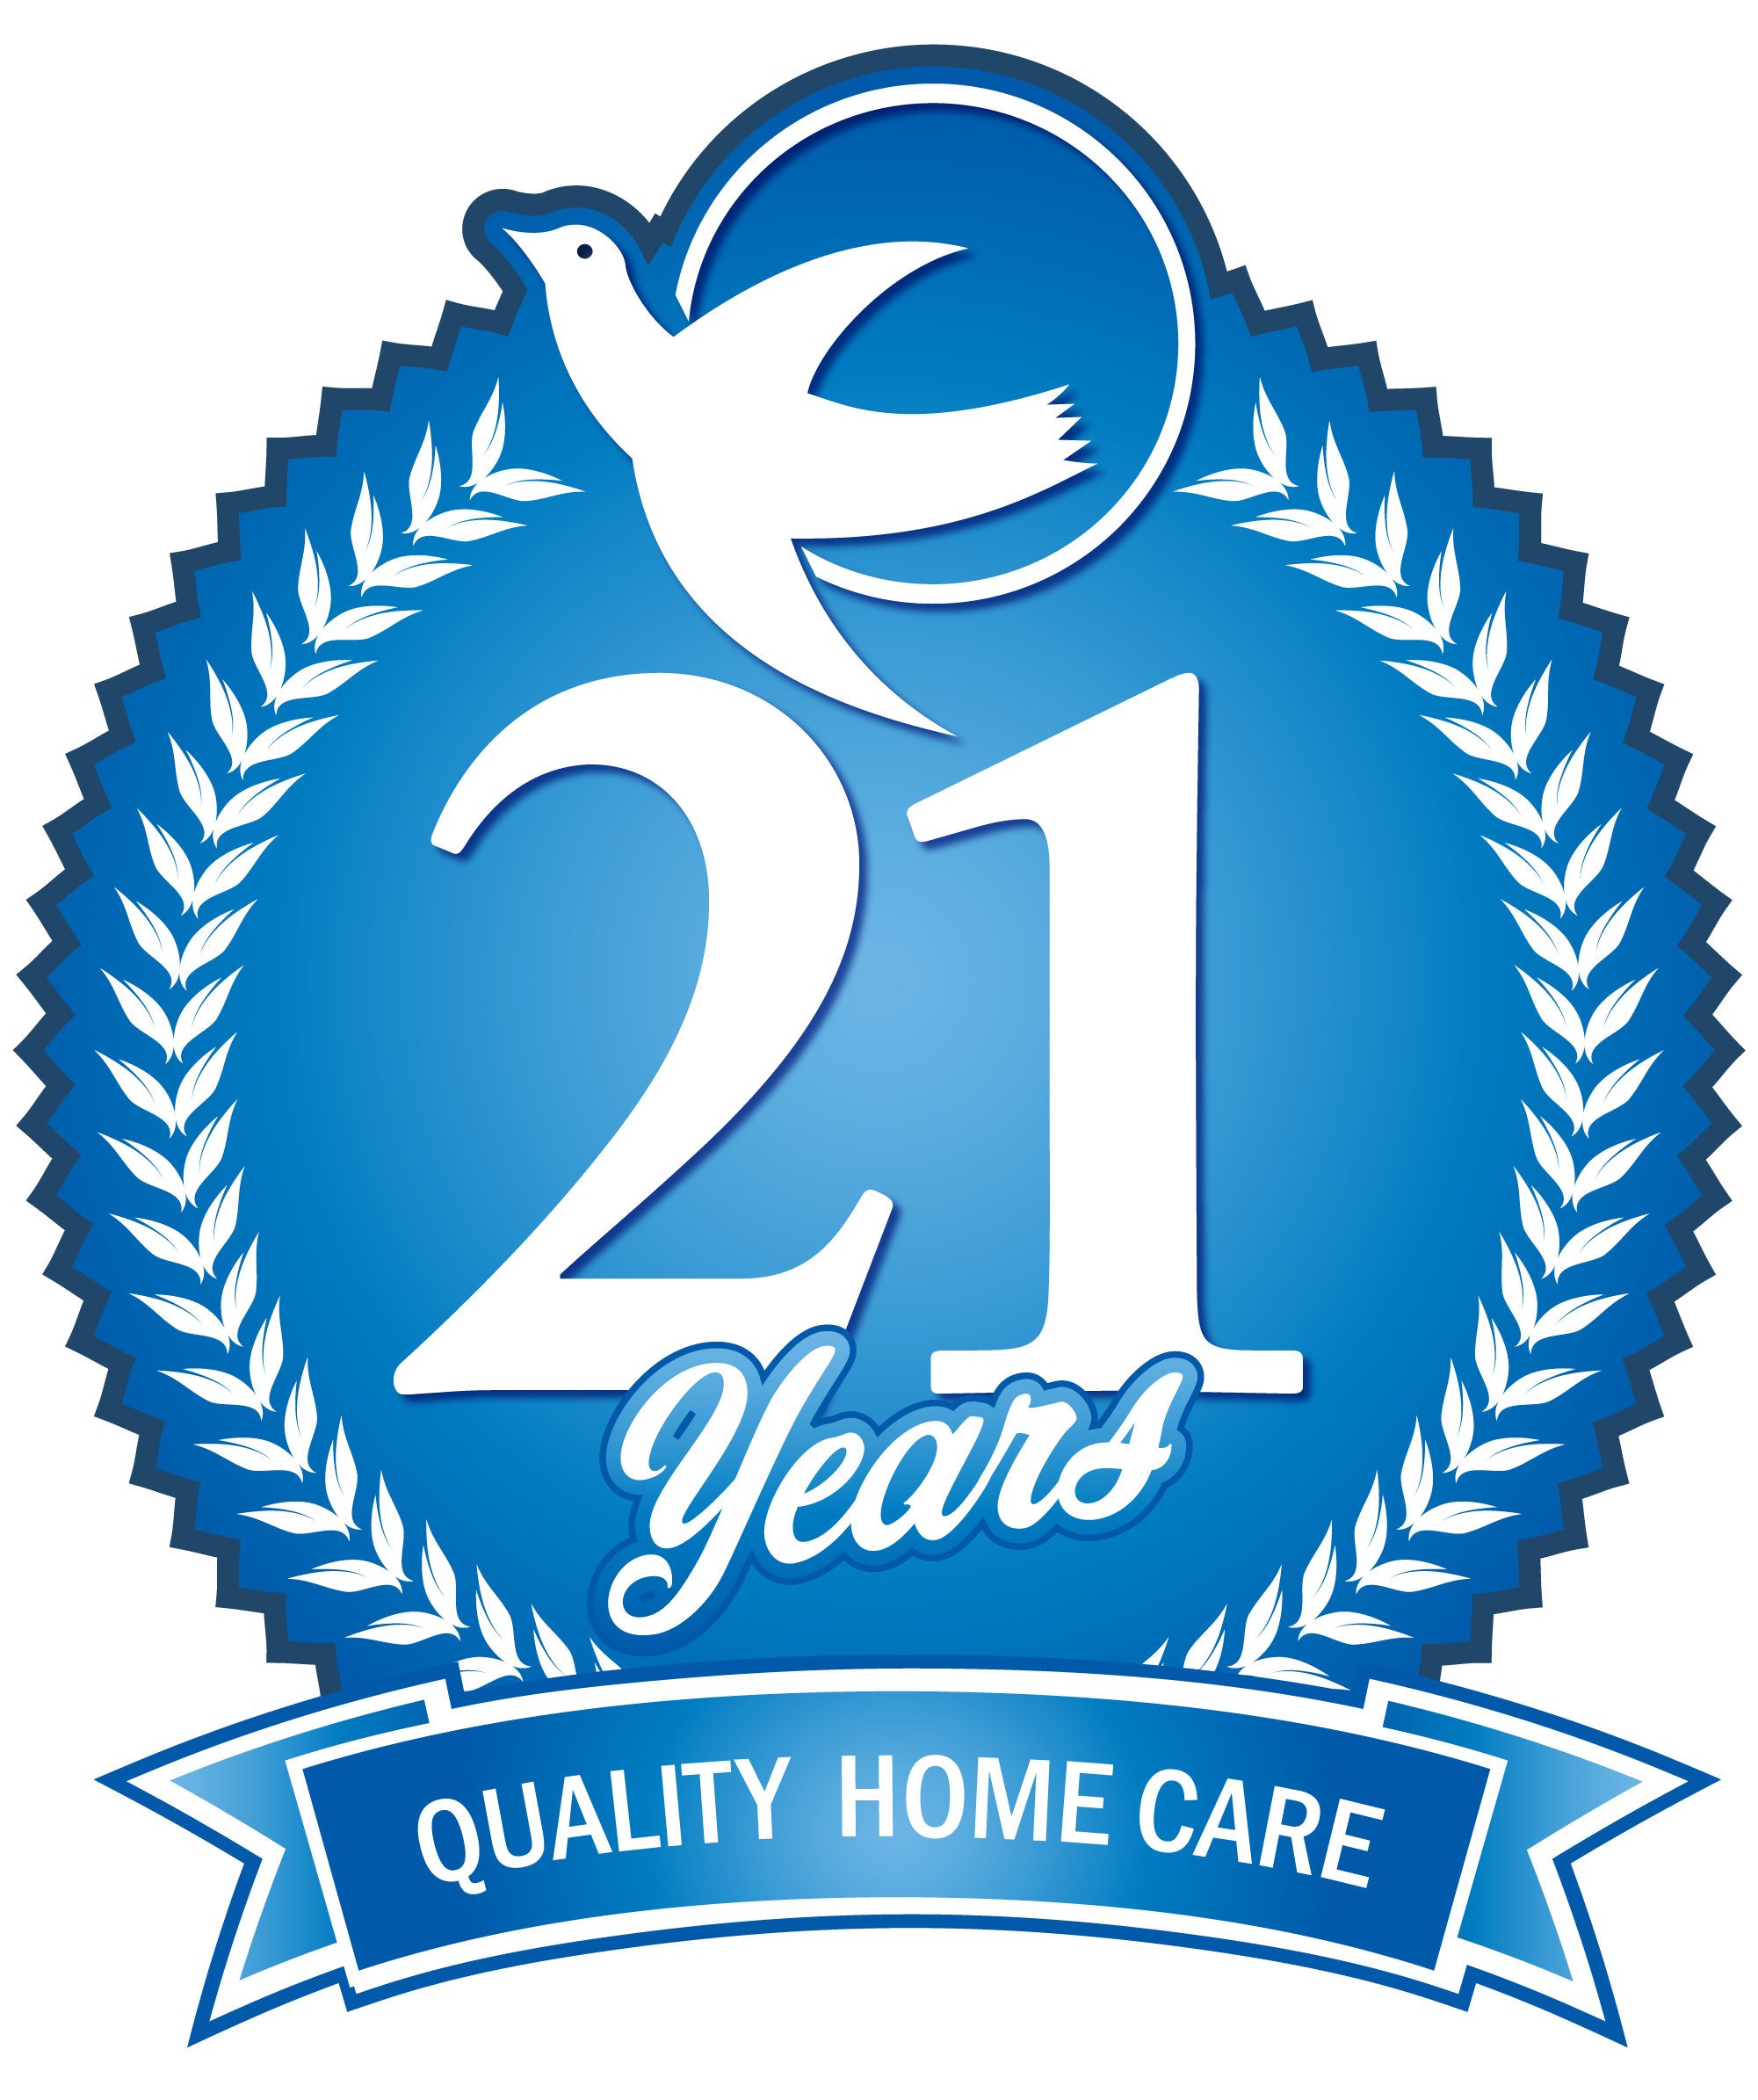 21 years of home care